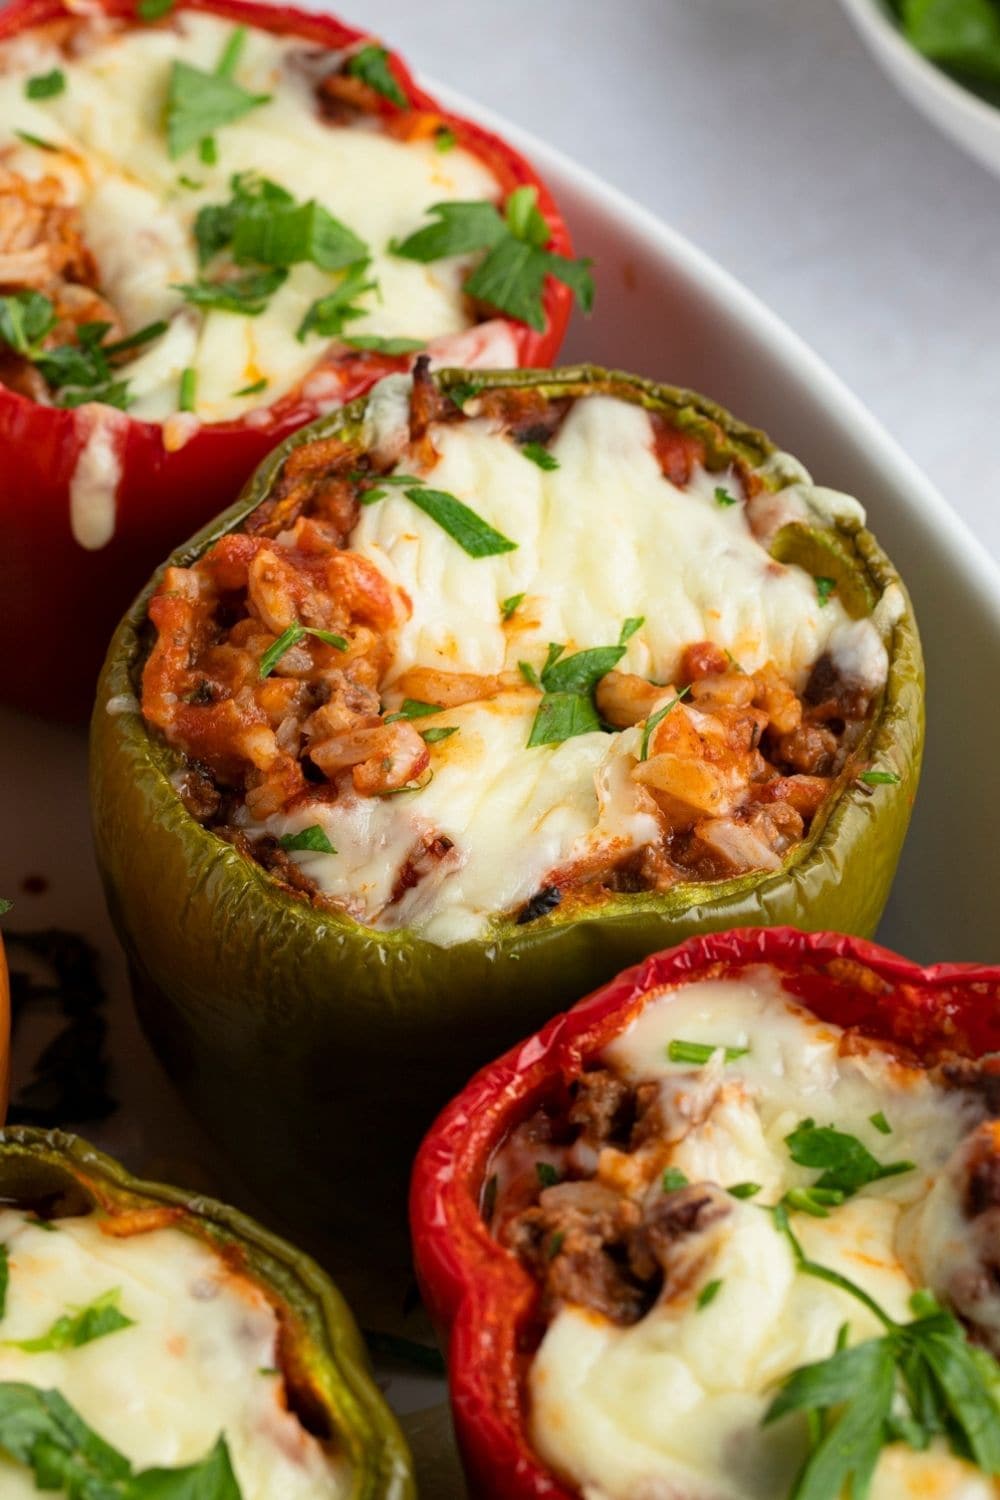 Homemade Stuffed Bell Peppers with Ground Beef and Cheese